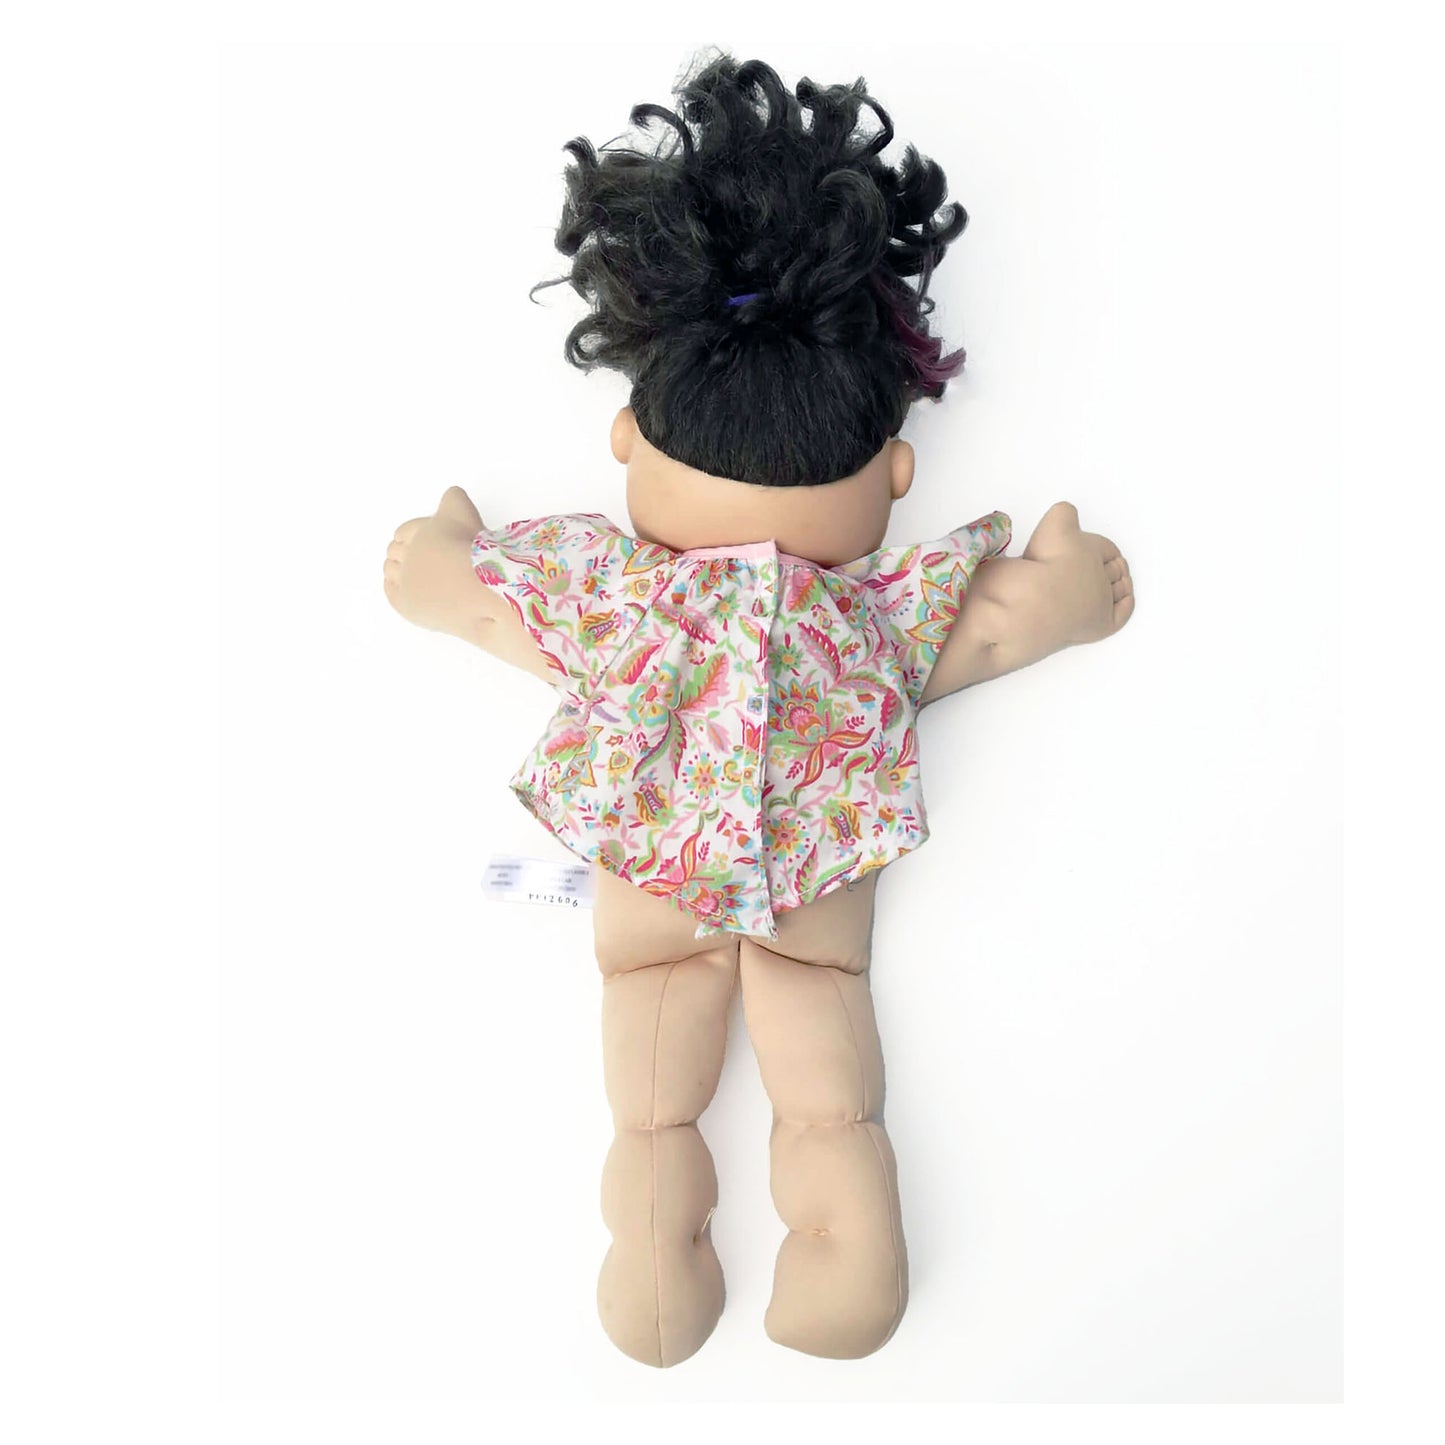 cabbage-patch-doll-back-side-full-view-2.-Shop-eBargainsAndDeals.com.